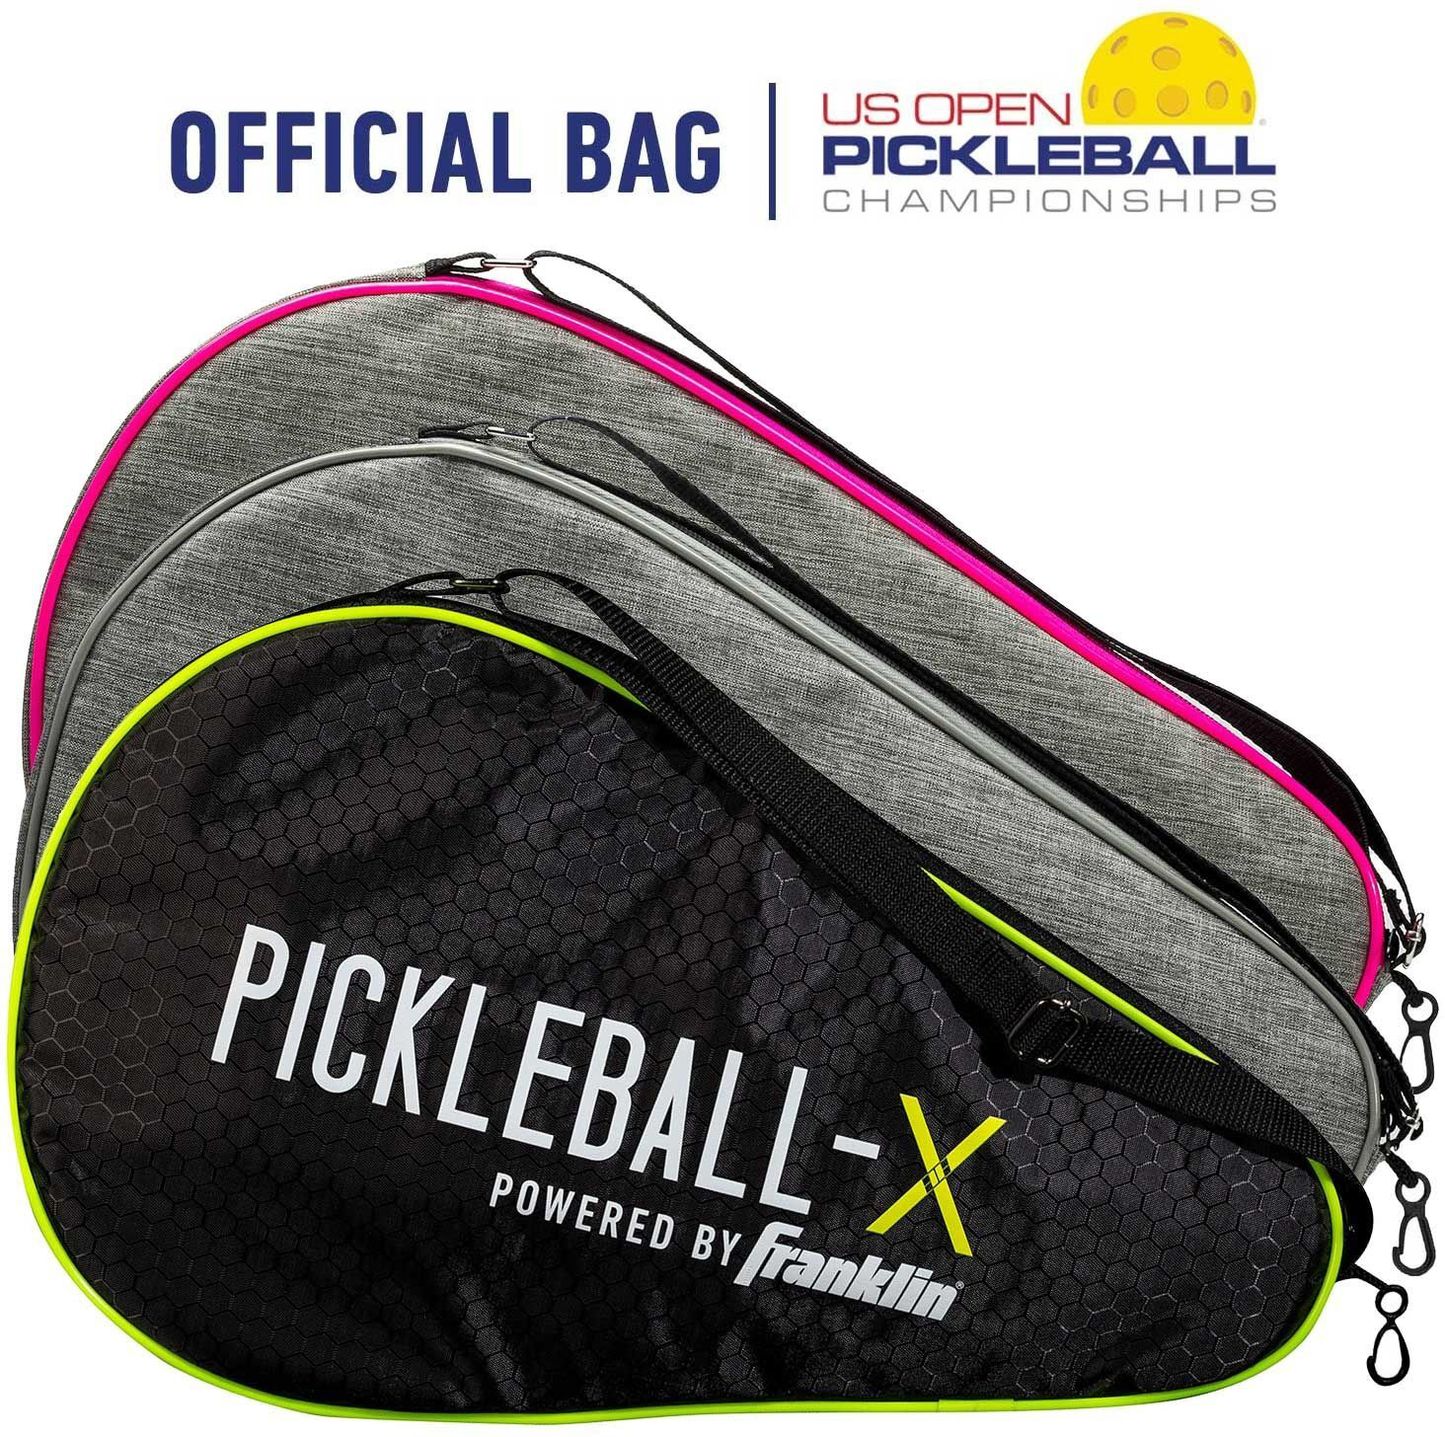 Convenient Franklin Pickleball Paddle Bag with padded strap.